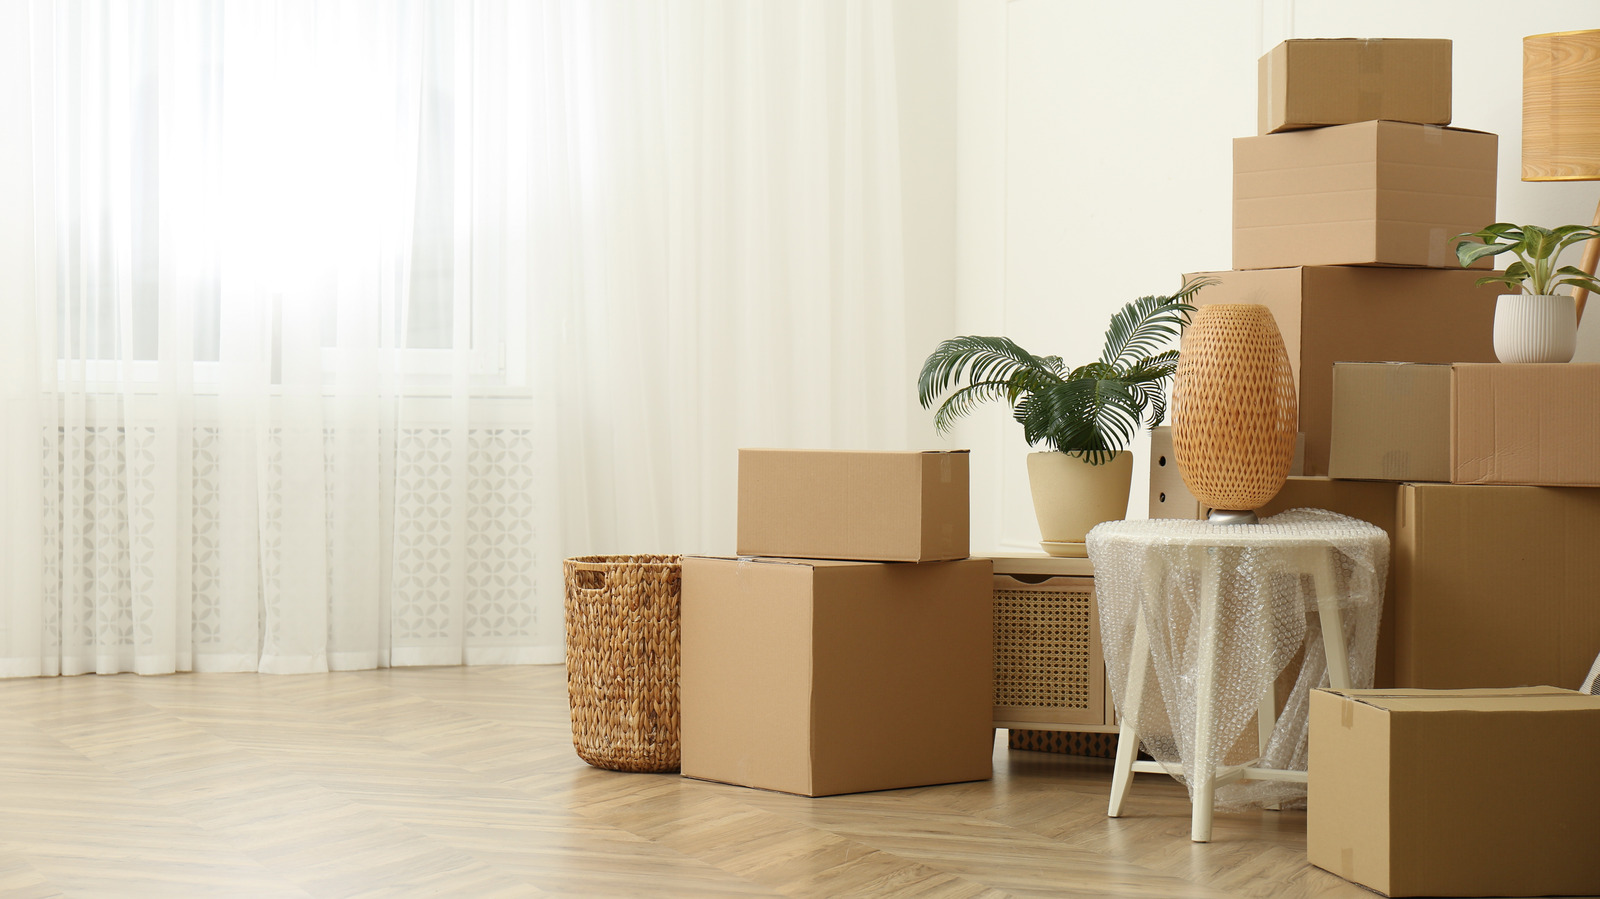 https://www.housedigest.com/img/gallery/home-depot-or-lowes-which-has-better-deals-on-moving-boxes/l-intro-1670351429.jpg